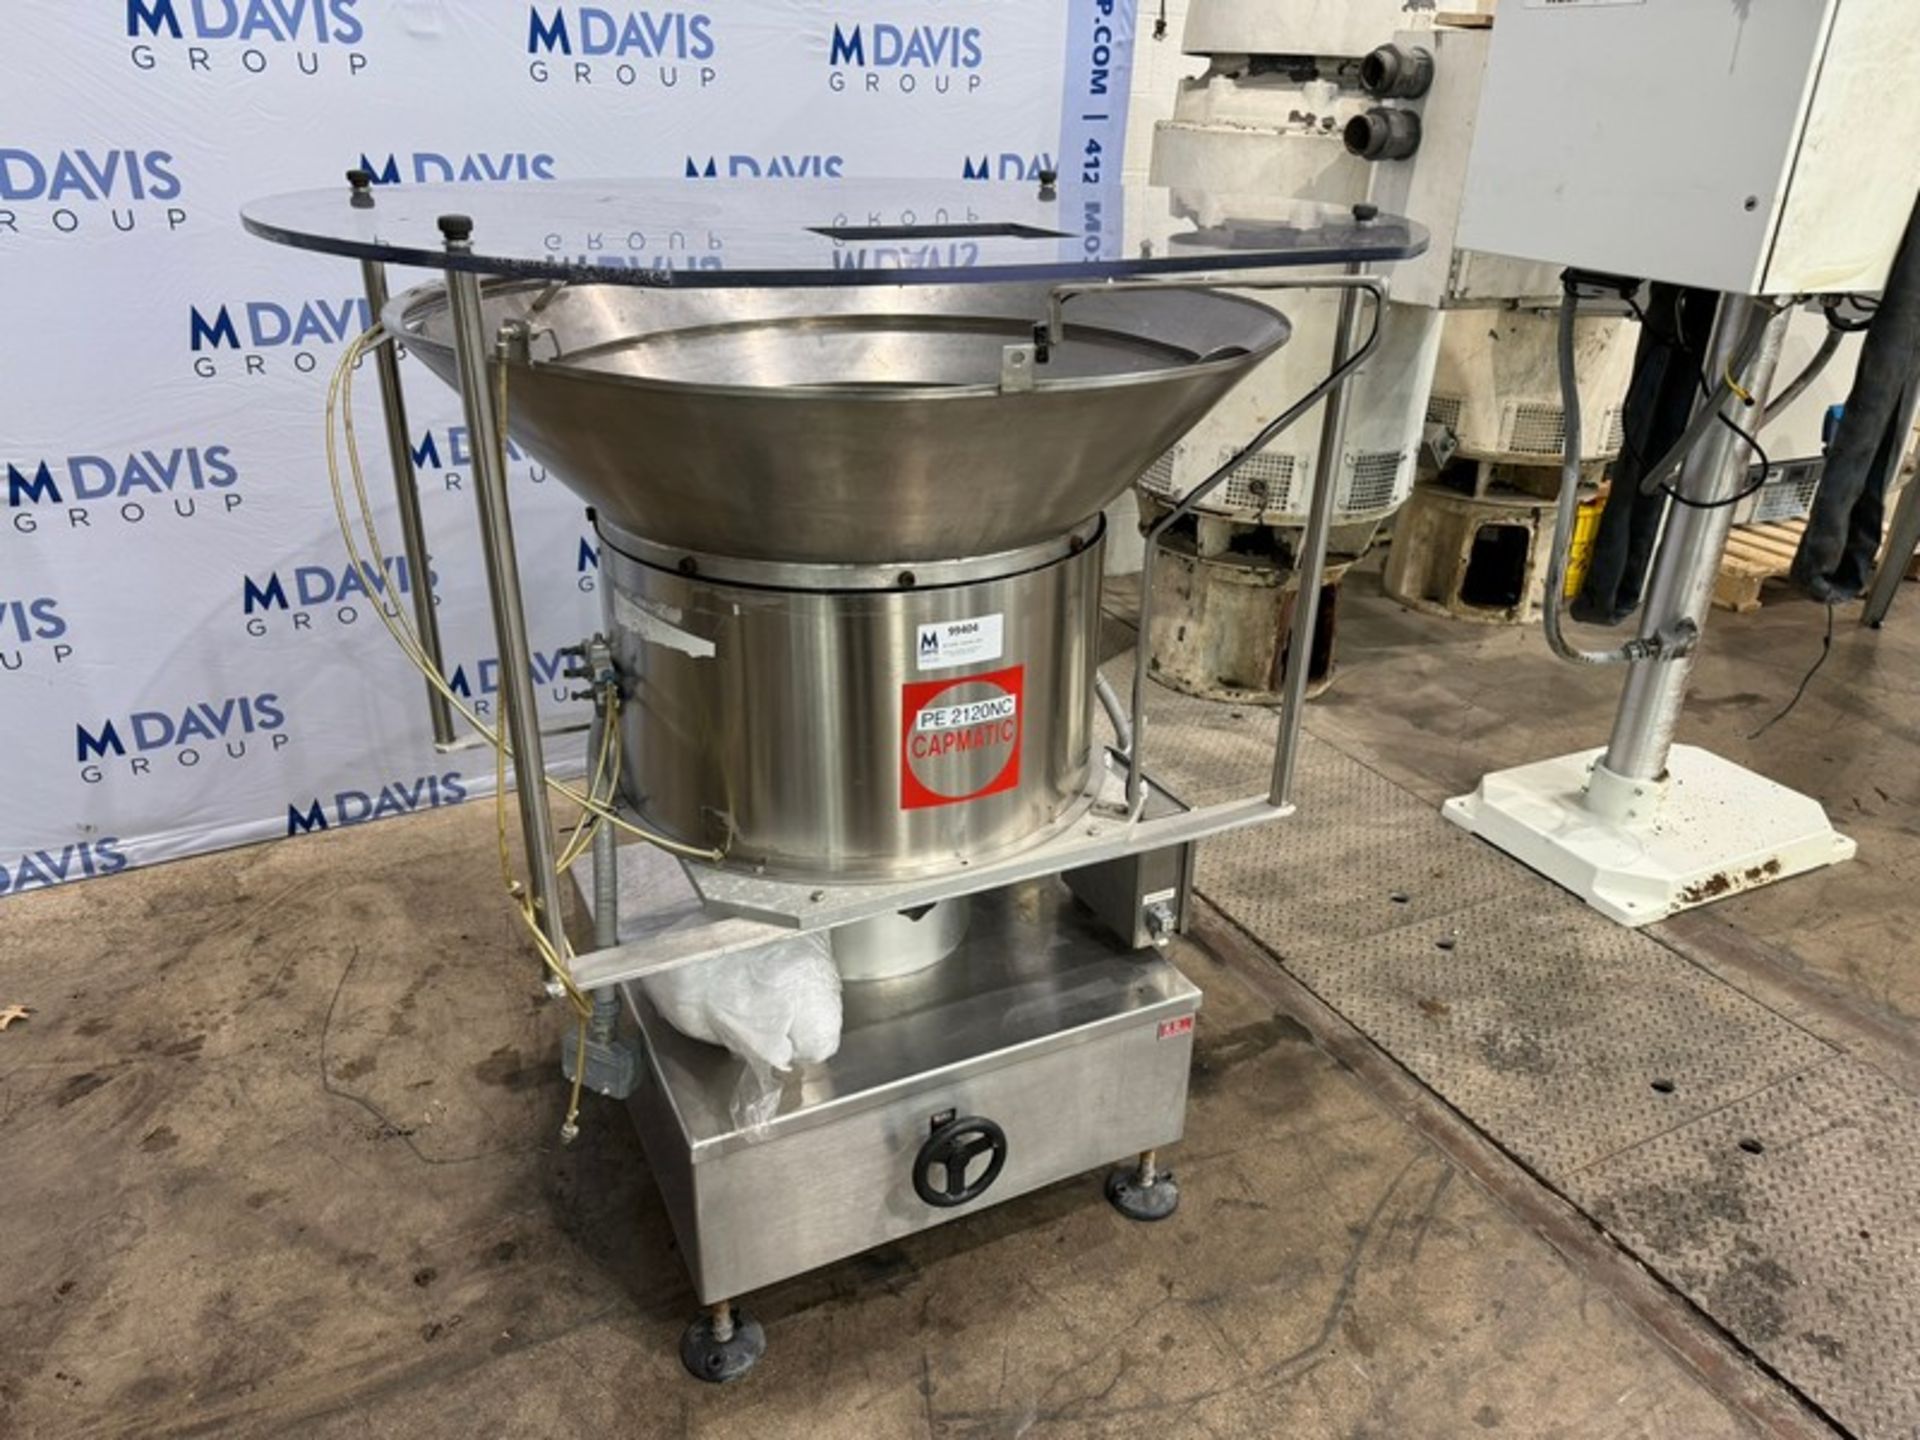 Capmatic S/S Vibratory Hopper,Mounted on S/S Frame (INV#99404) (Located @ the MDG Auction Showroom - Image 2 of 8